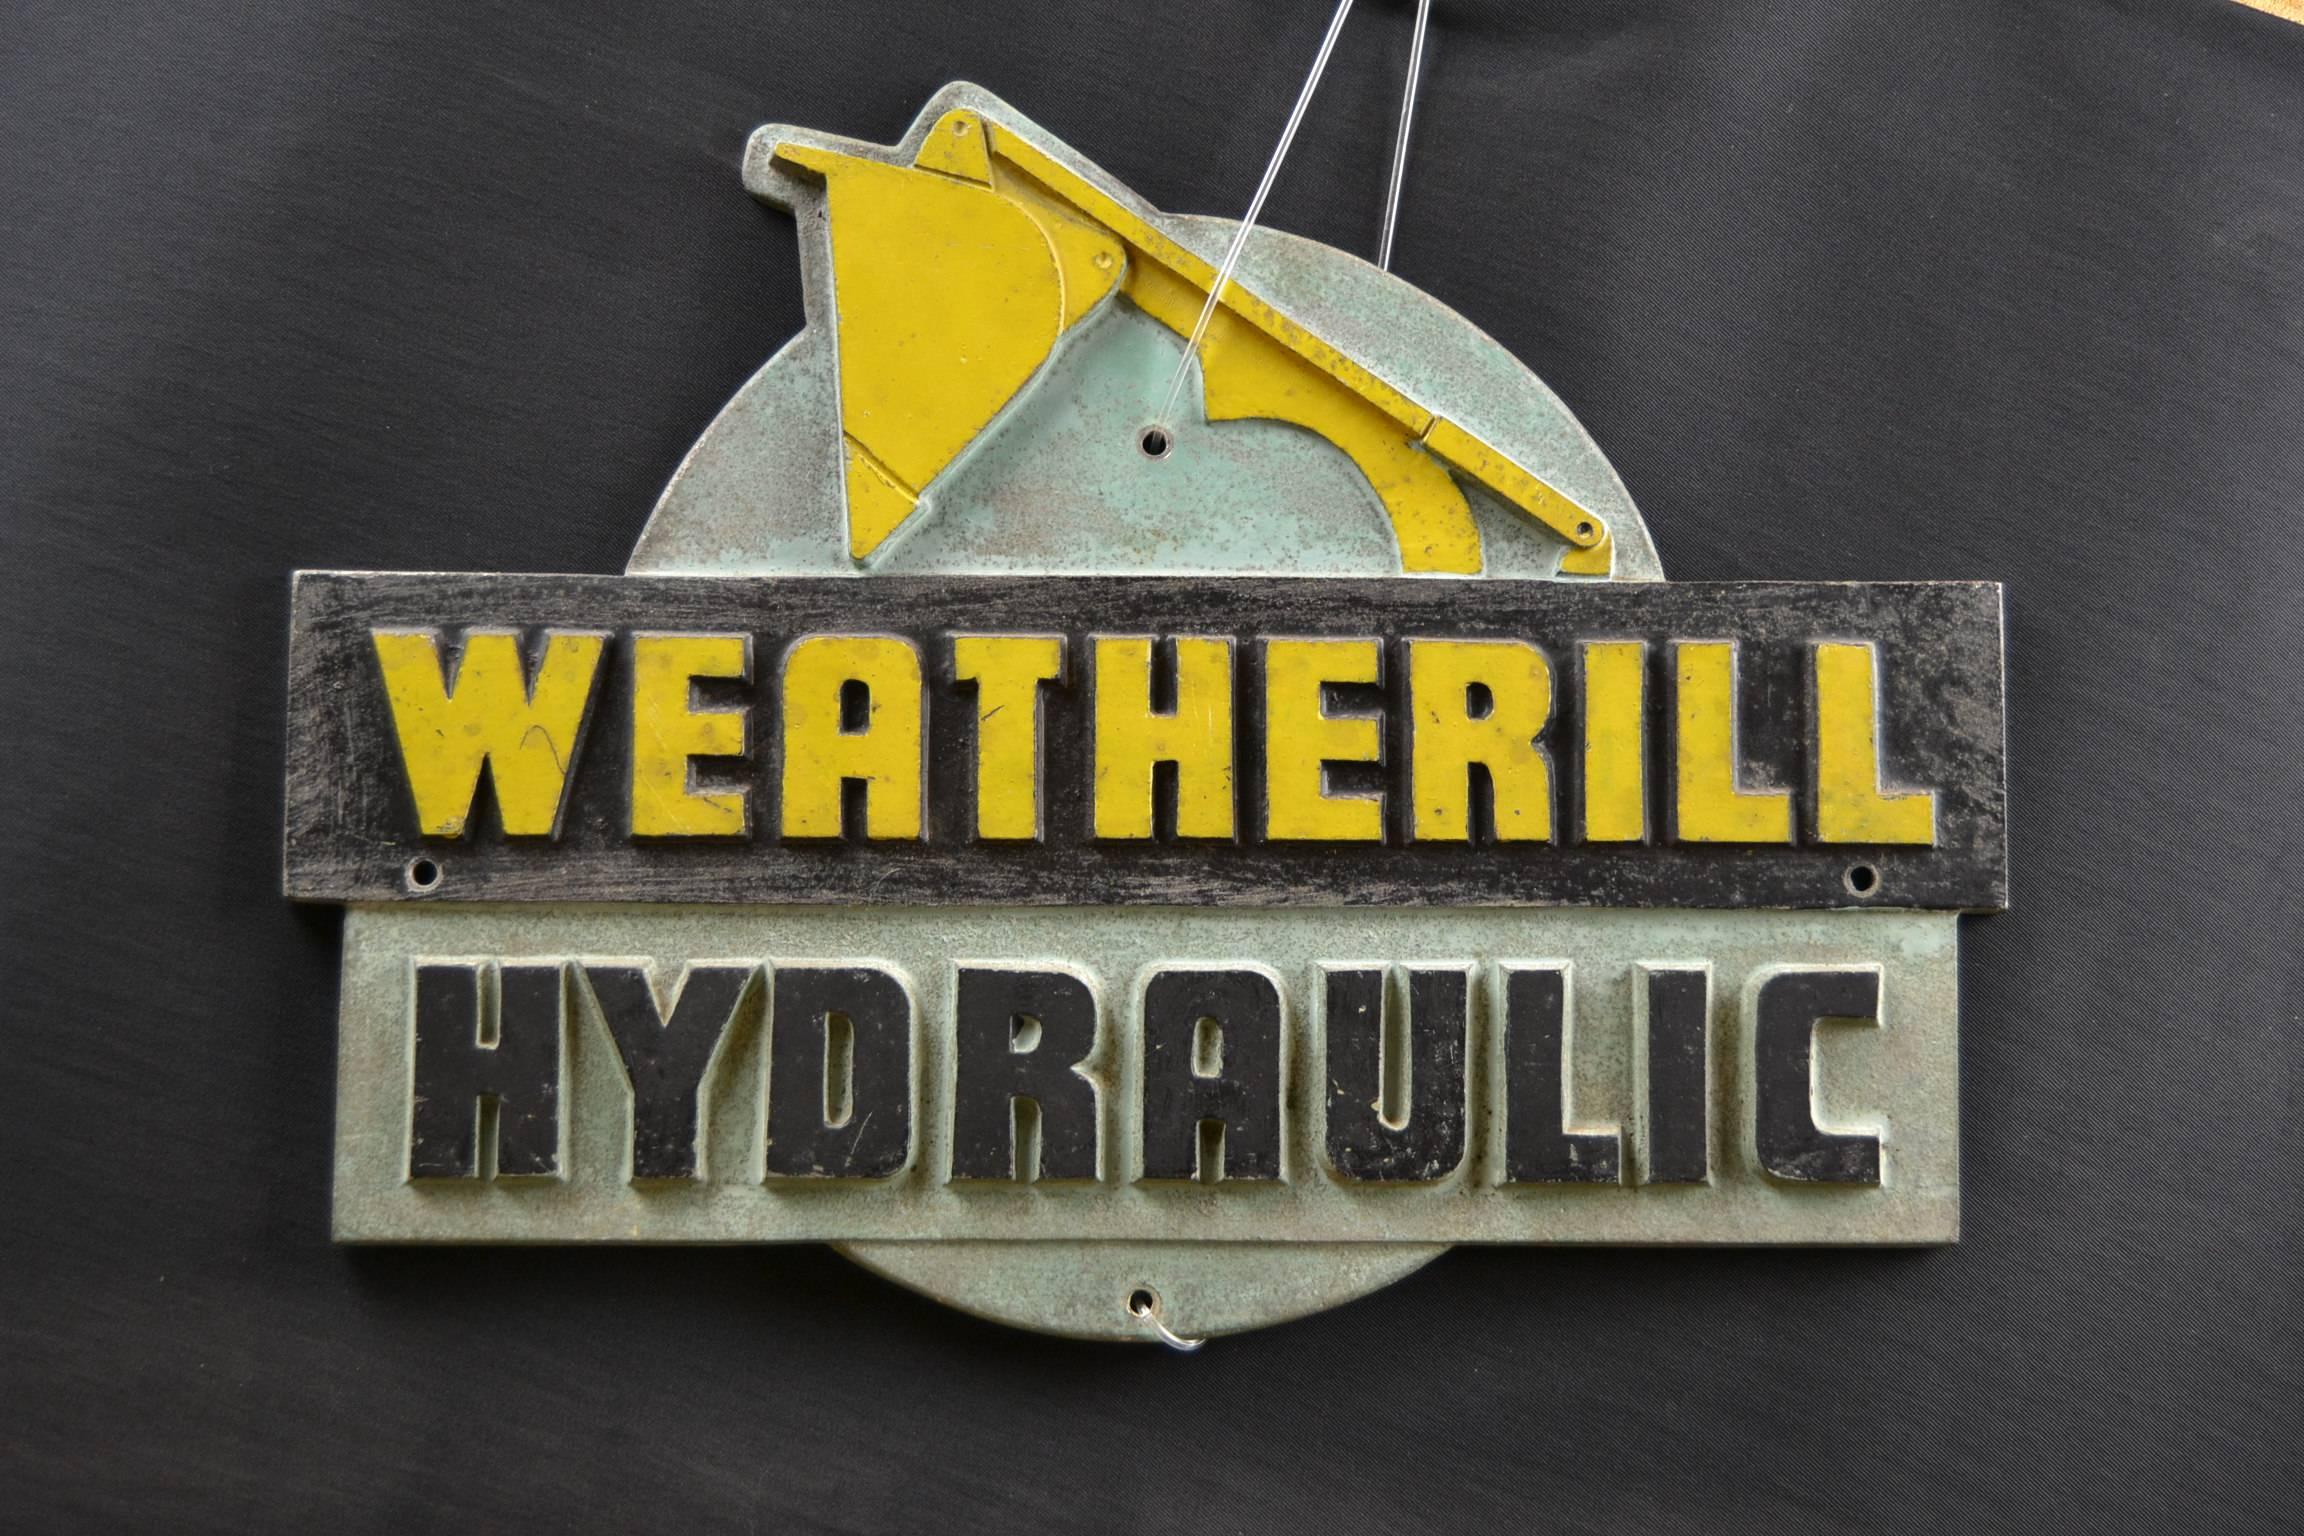 Old Industrial badge for Fred Weatherill Hydraulic loading Shovel Machine. 
This cast iron sign dates from the 1950s.
This Art Deco Sign is made of cast iron and still in perfect condition.
The sign - logo was used to be placed on the back of the